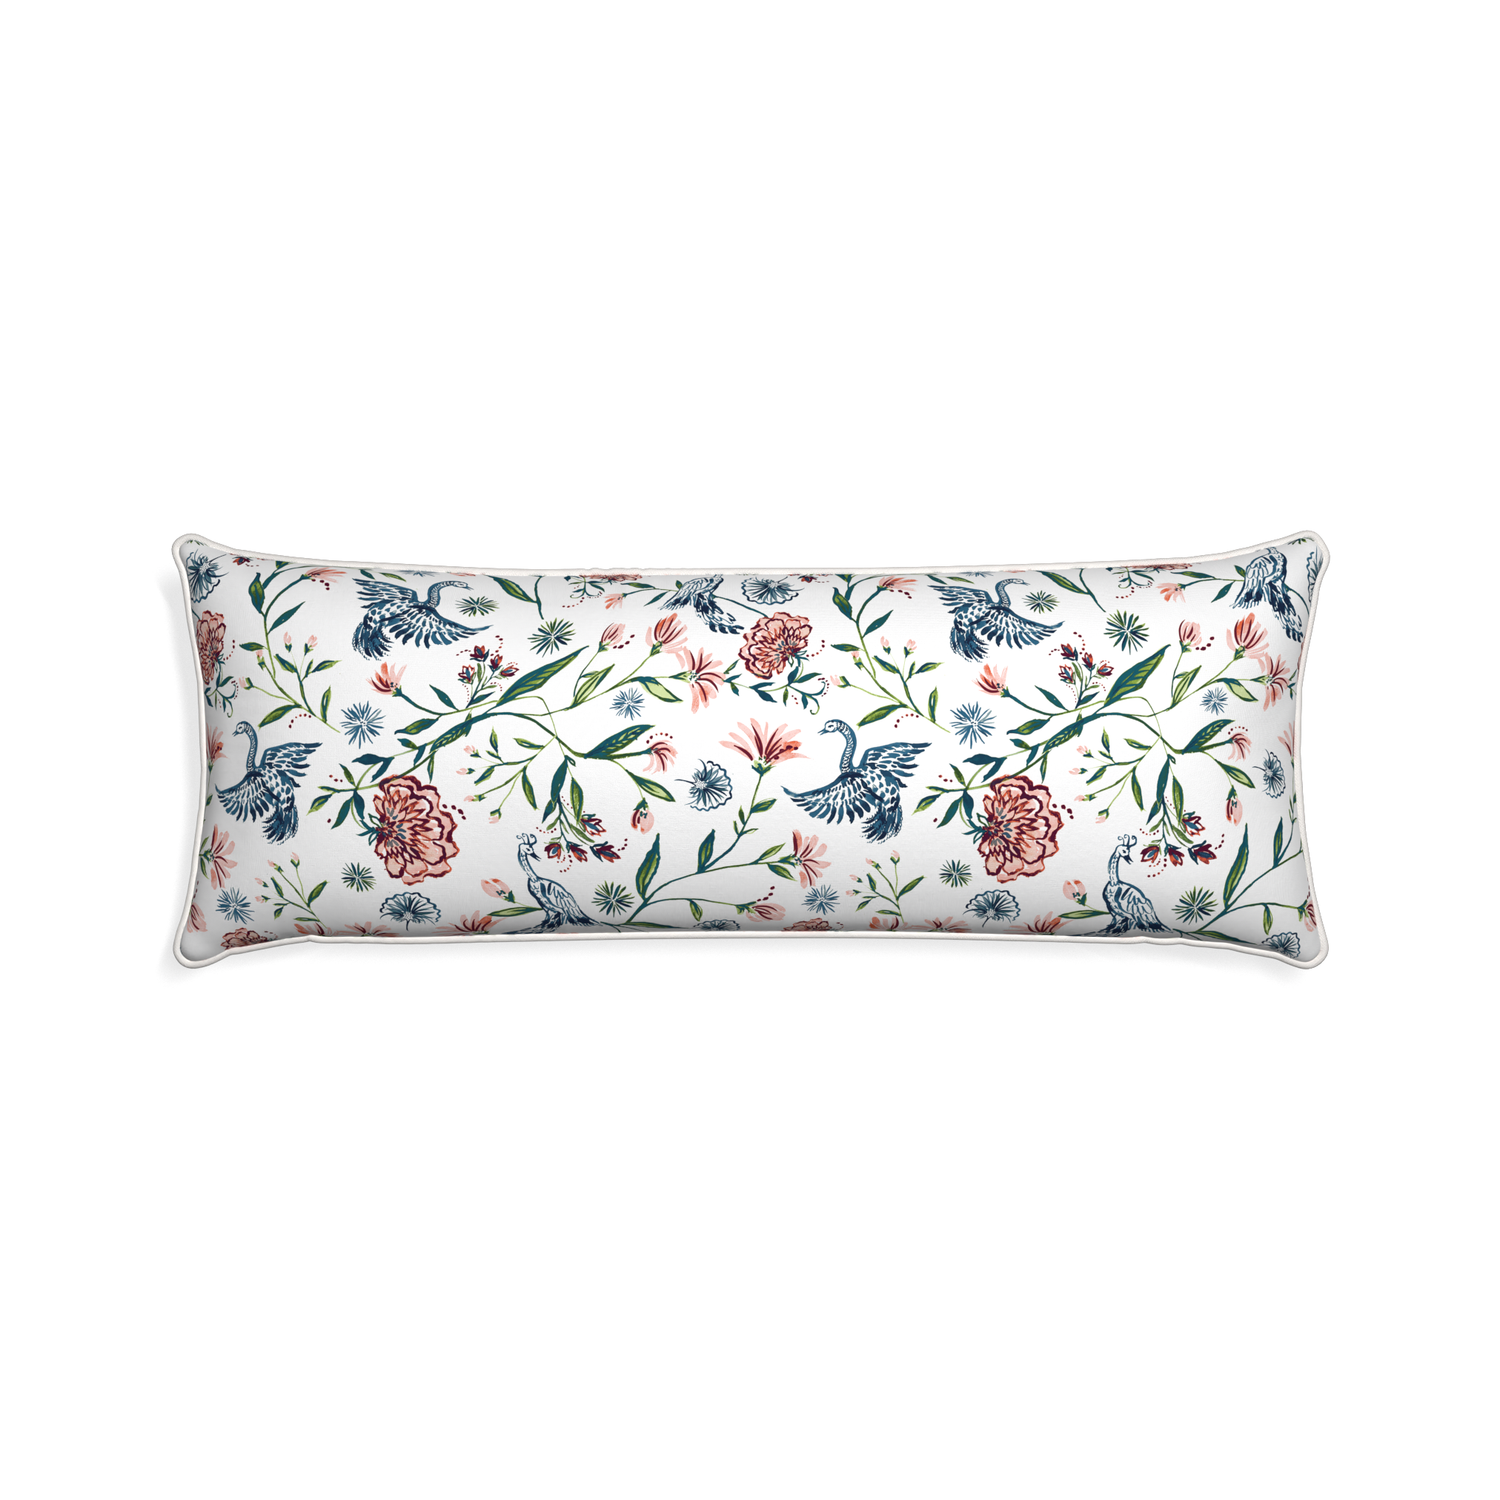 Xl-lumbar daphne cream custom pillow with snow piping on white background